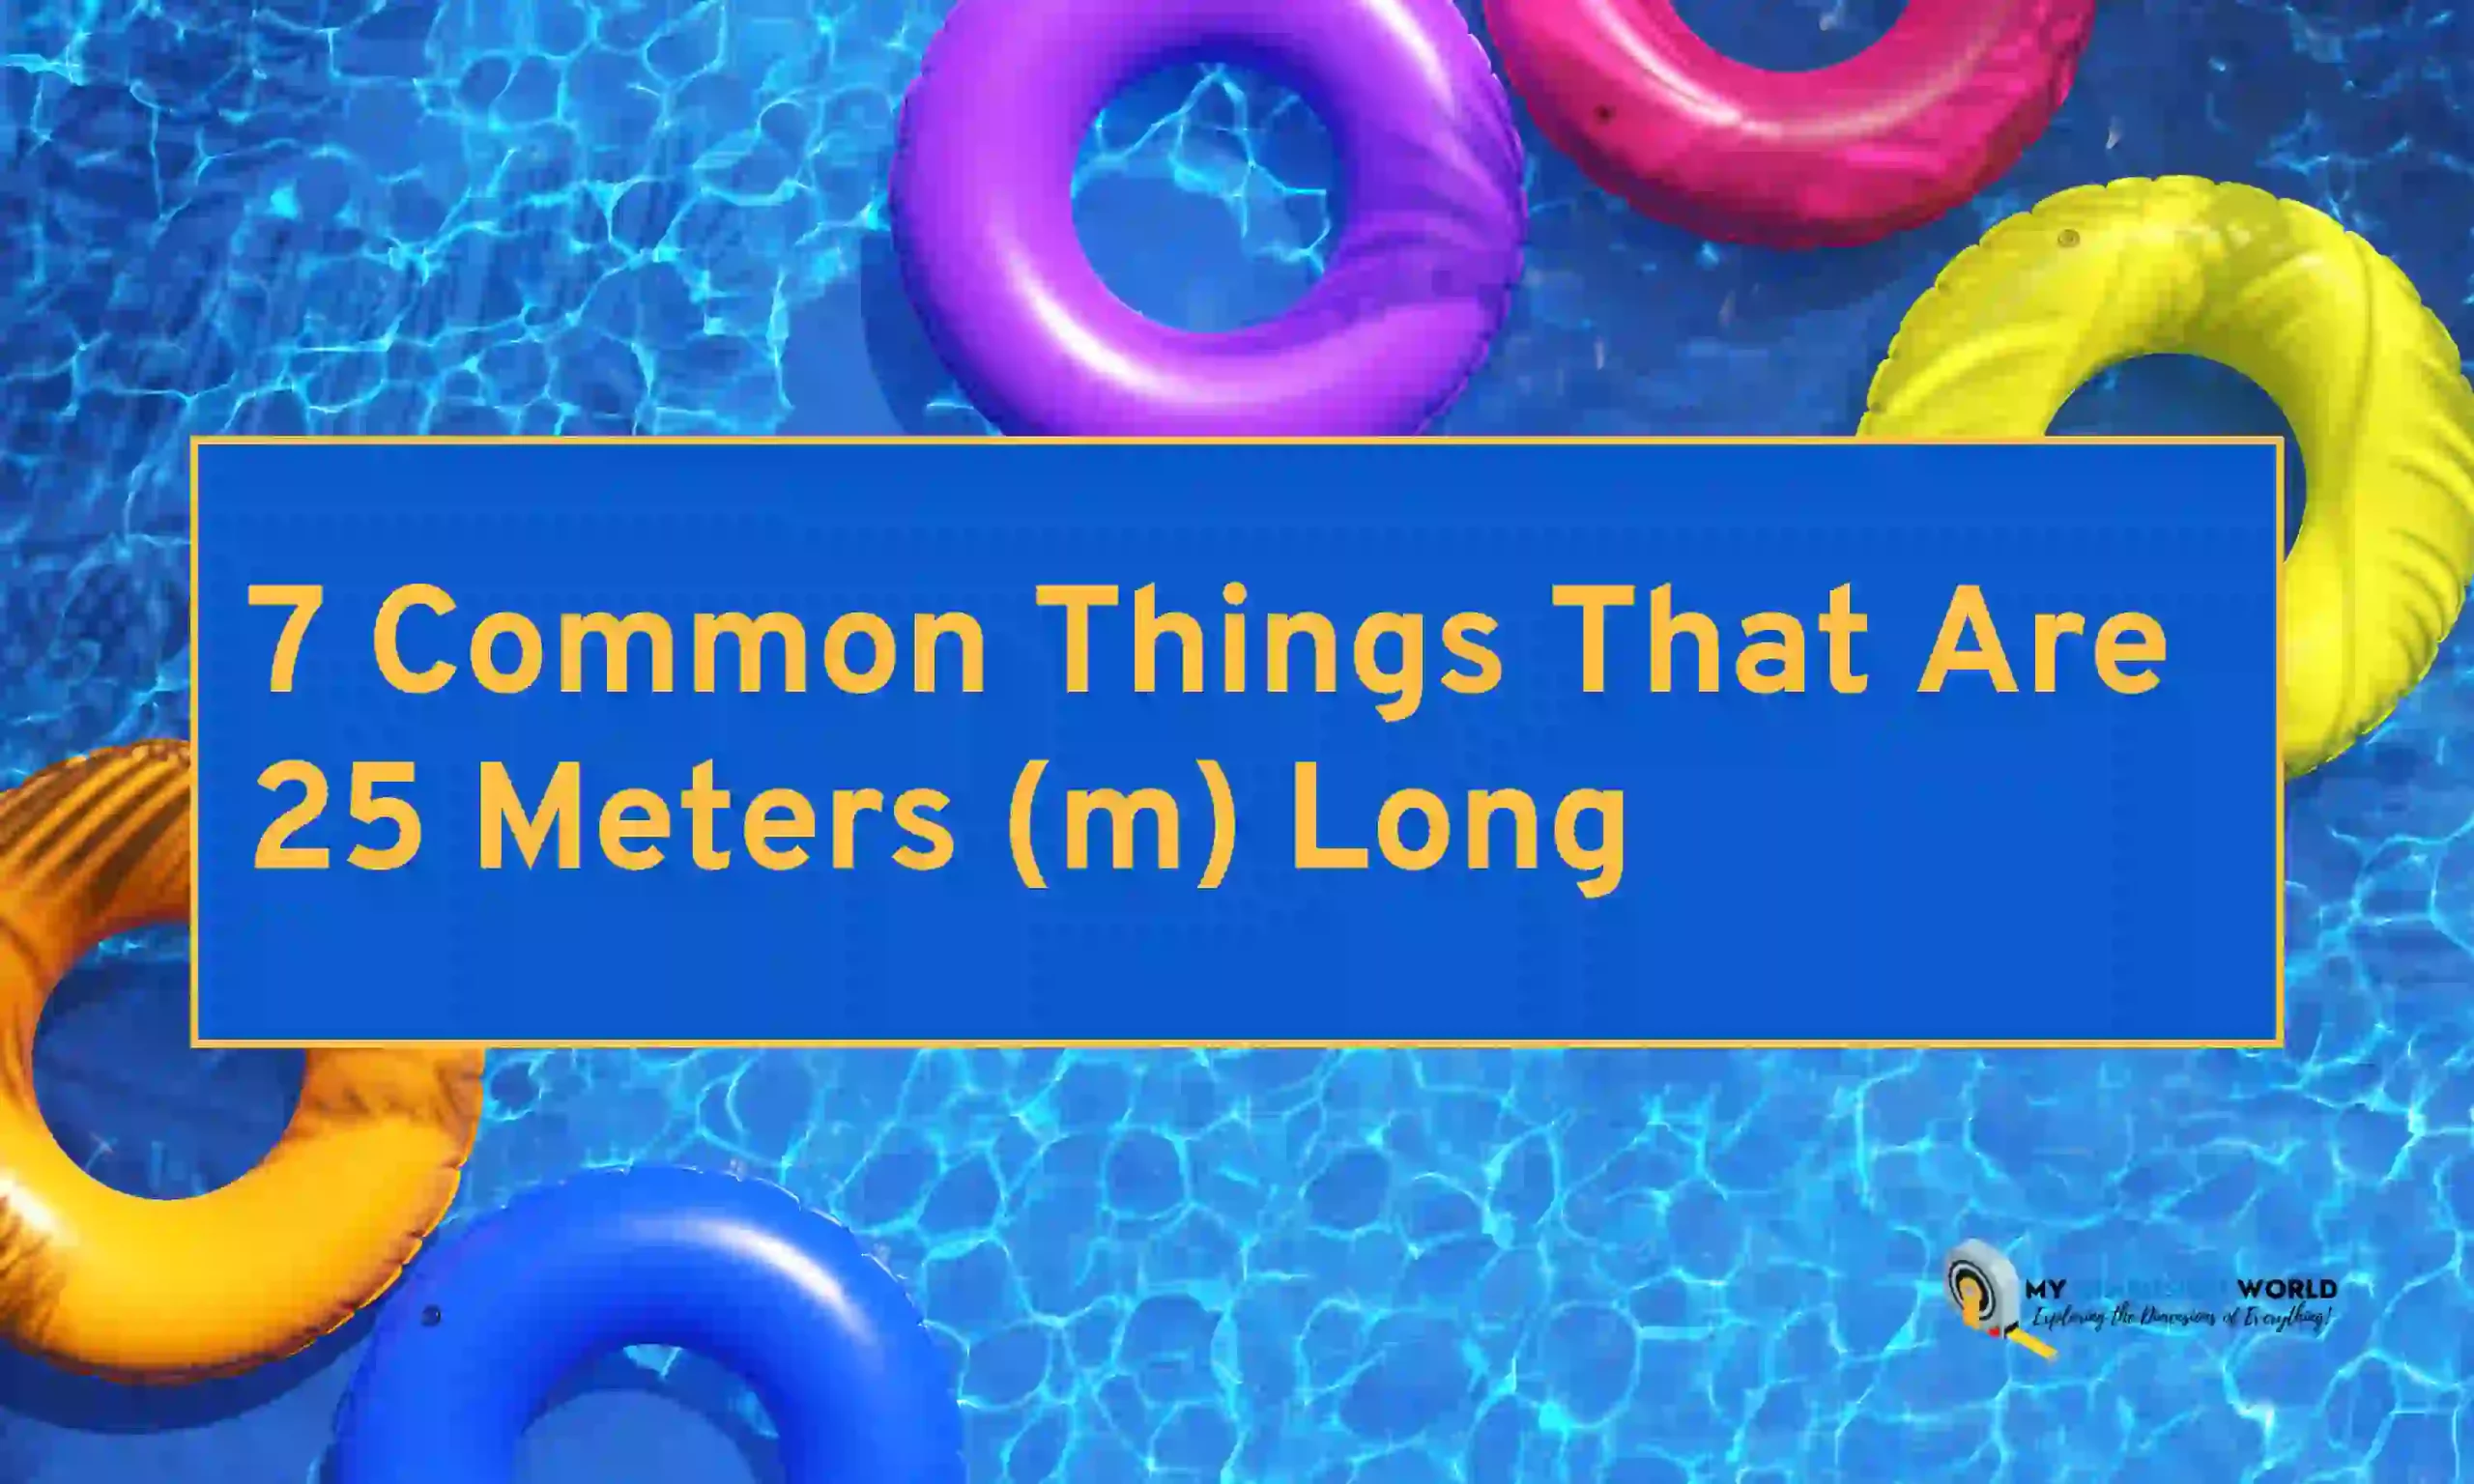 7 Common Things That Are 25 Meters (m) Long